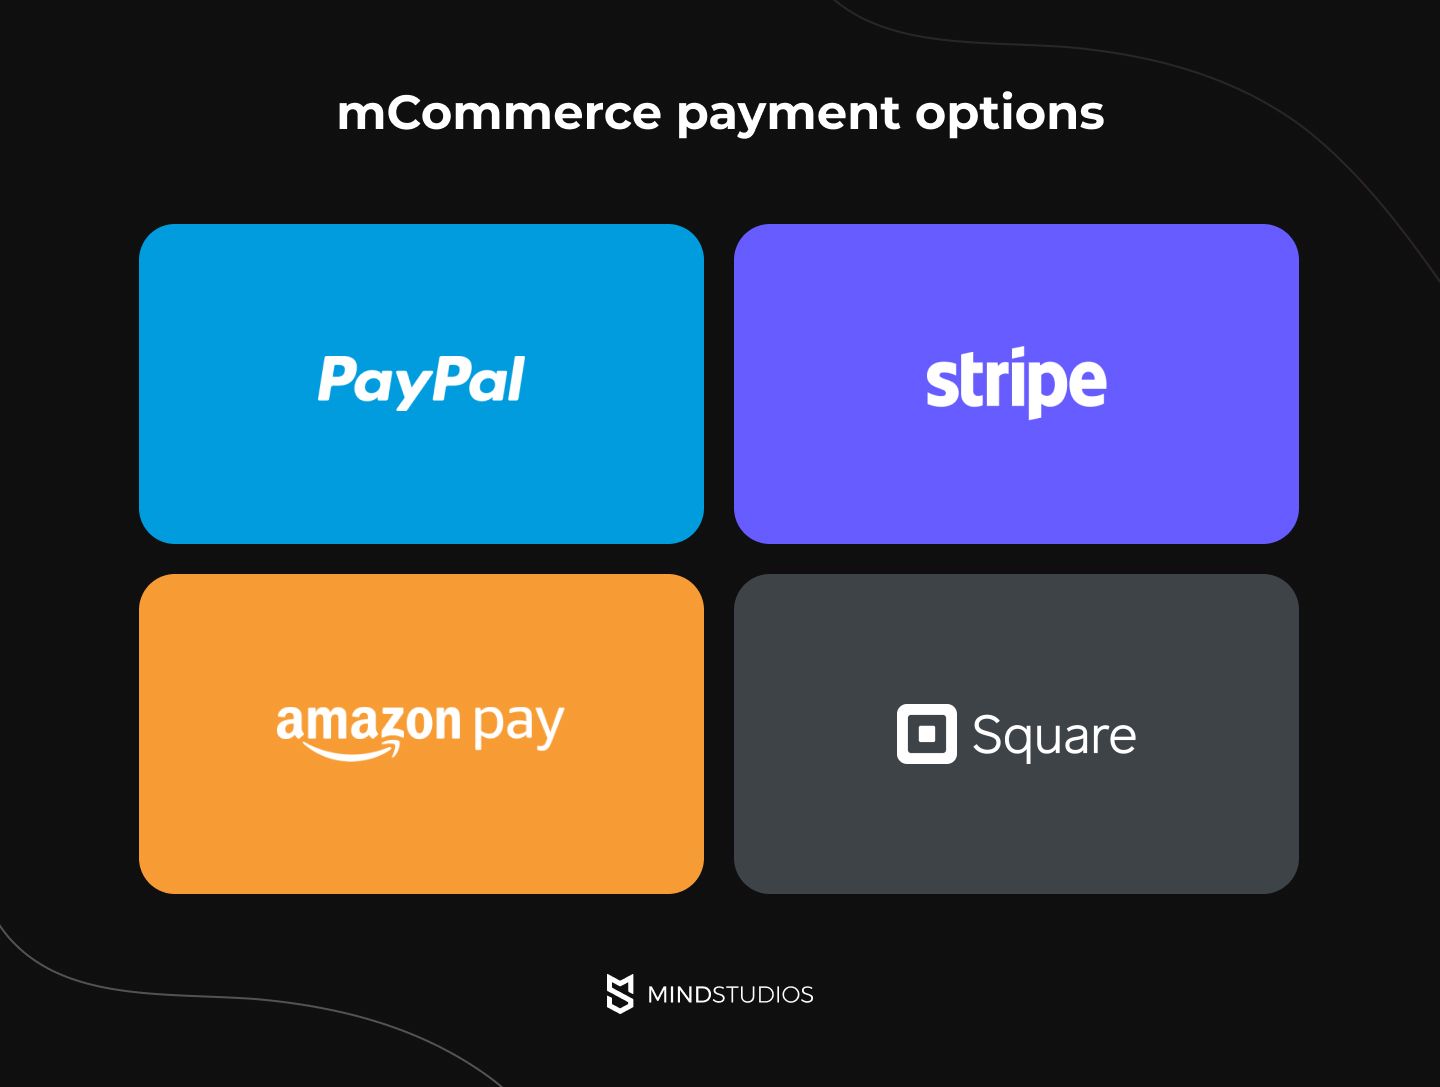 mCommerce payment options